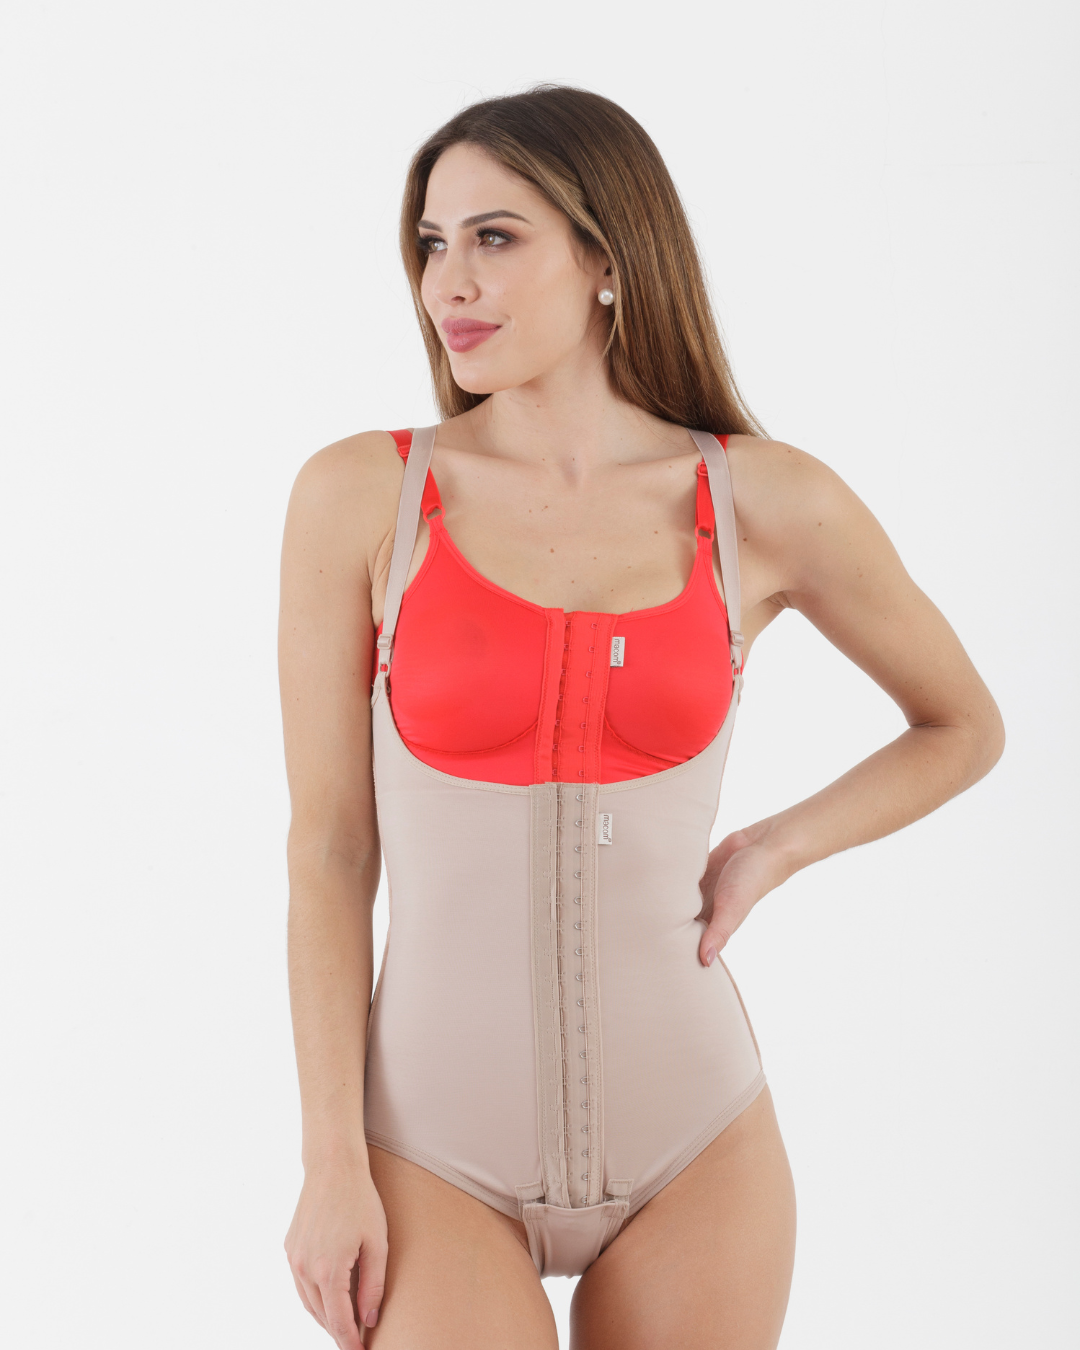 Macom clay high back front fastening girdle suitable for most abdominal surgeries including post c-section